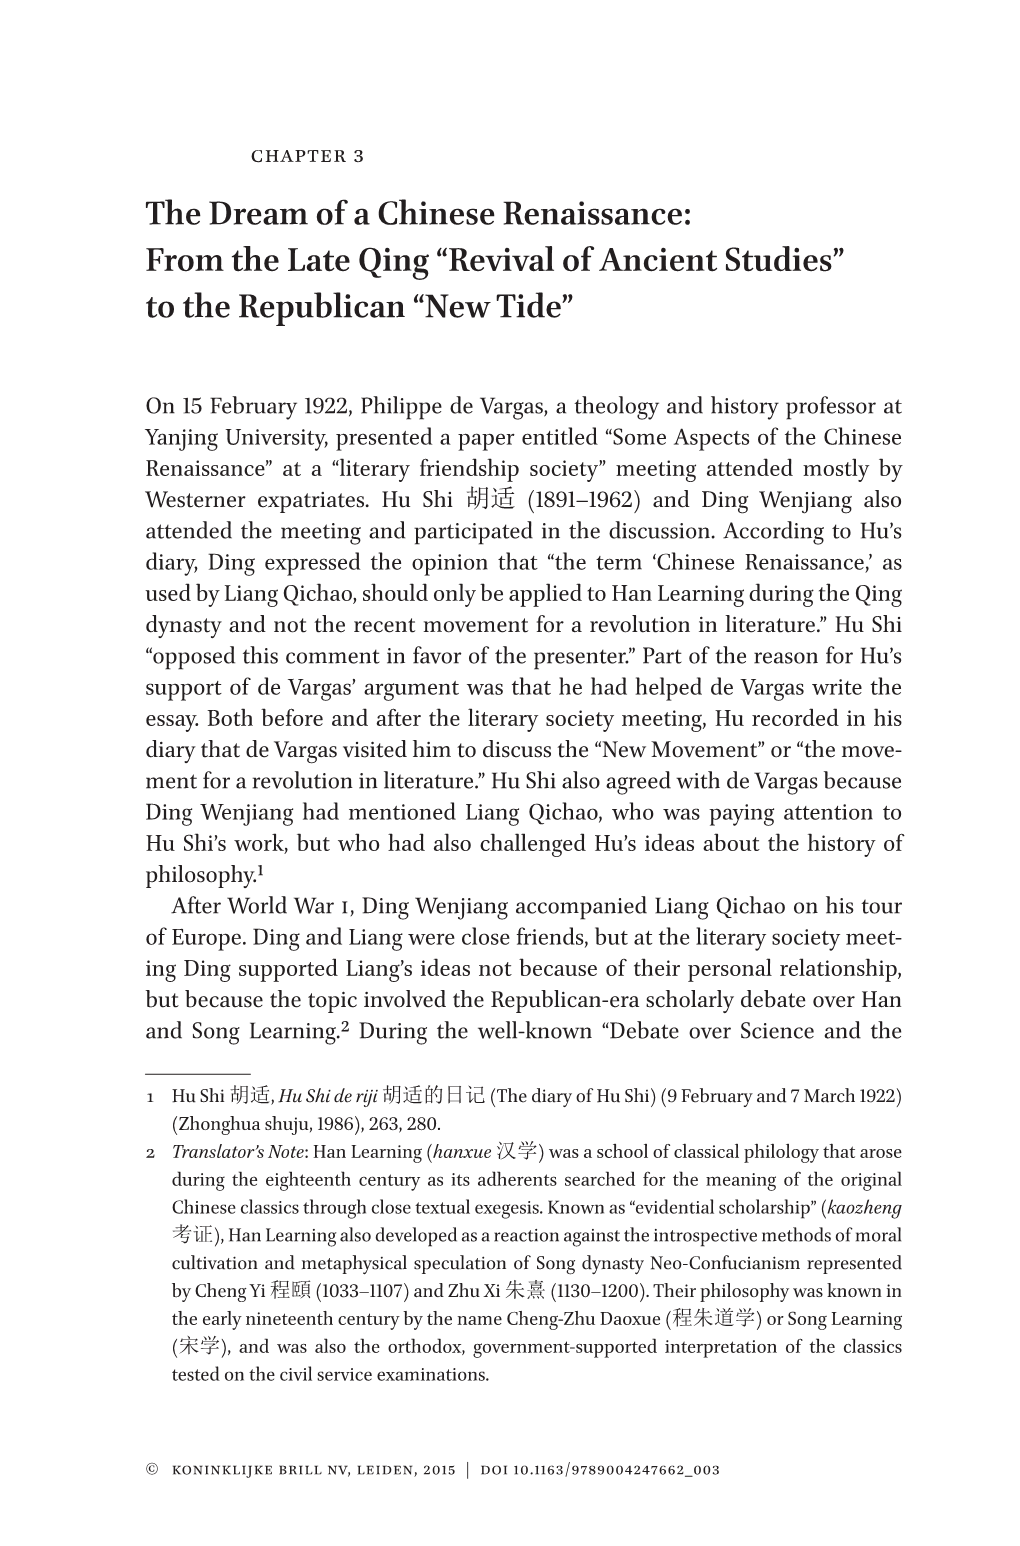 The Dream of a Chinese Renaissance: from the Late Qing “Revival of Ancient Studies” to the Republican “New Tide”